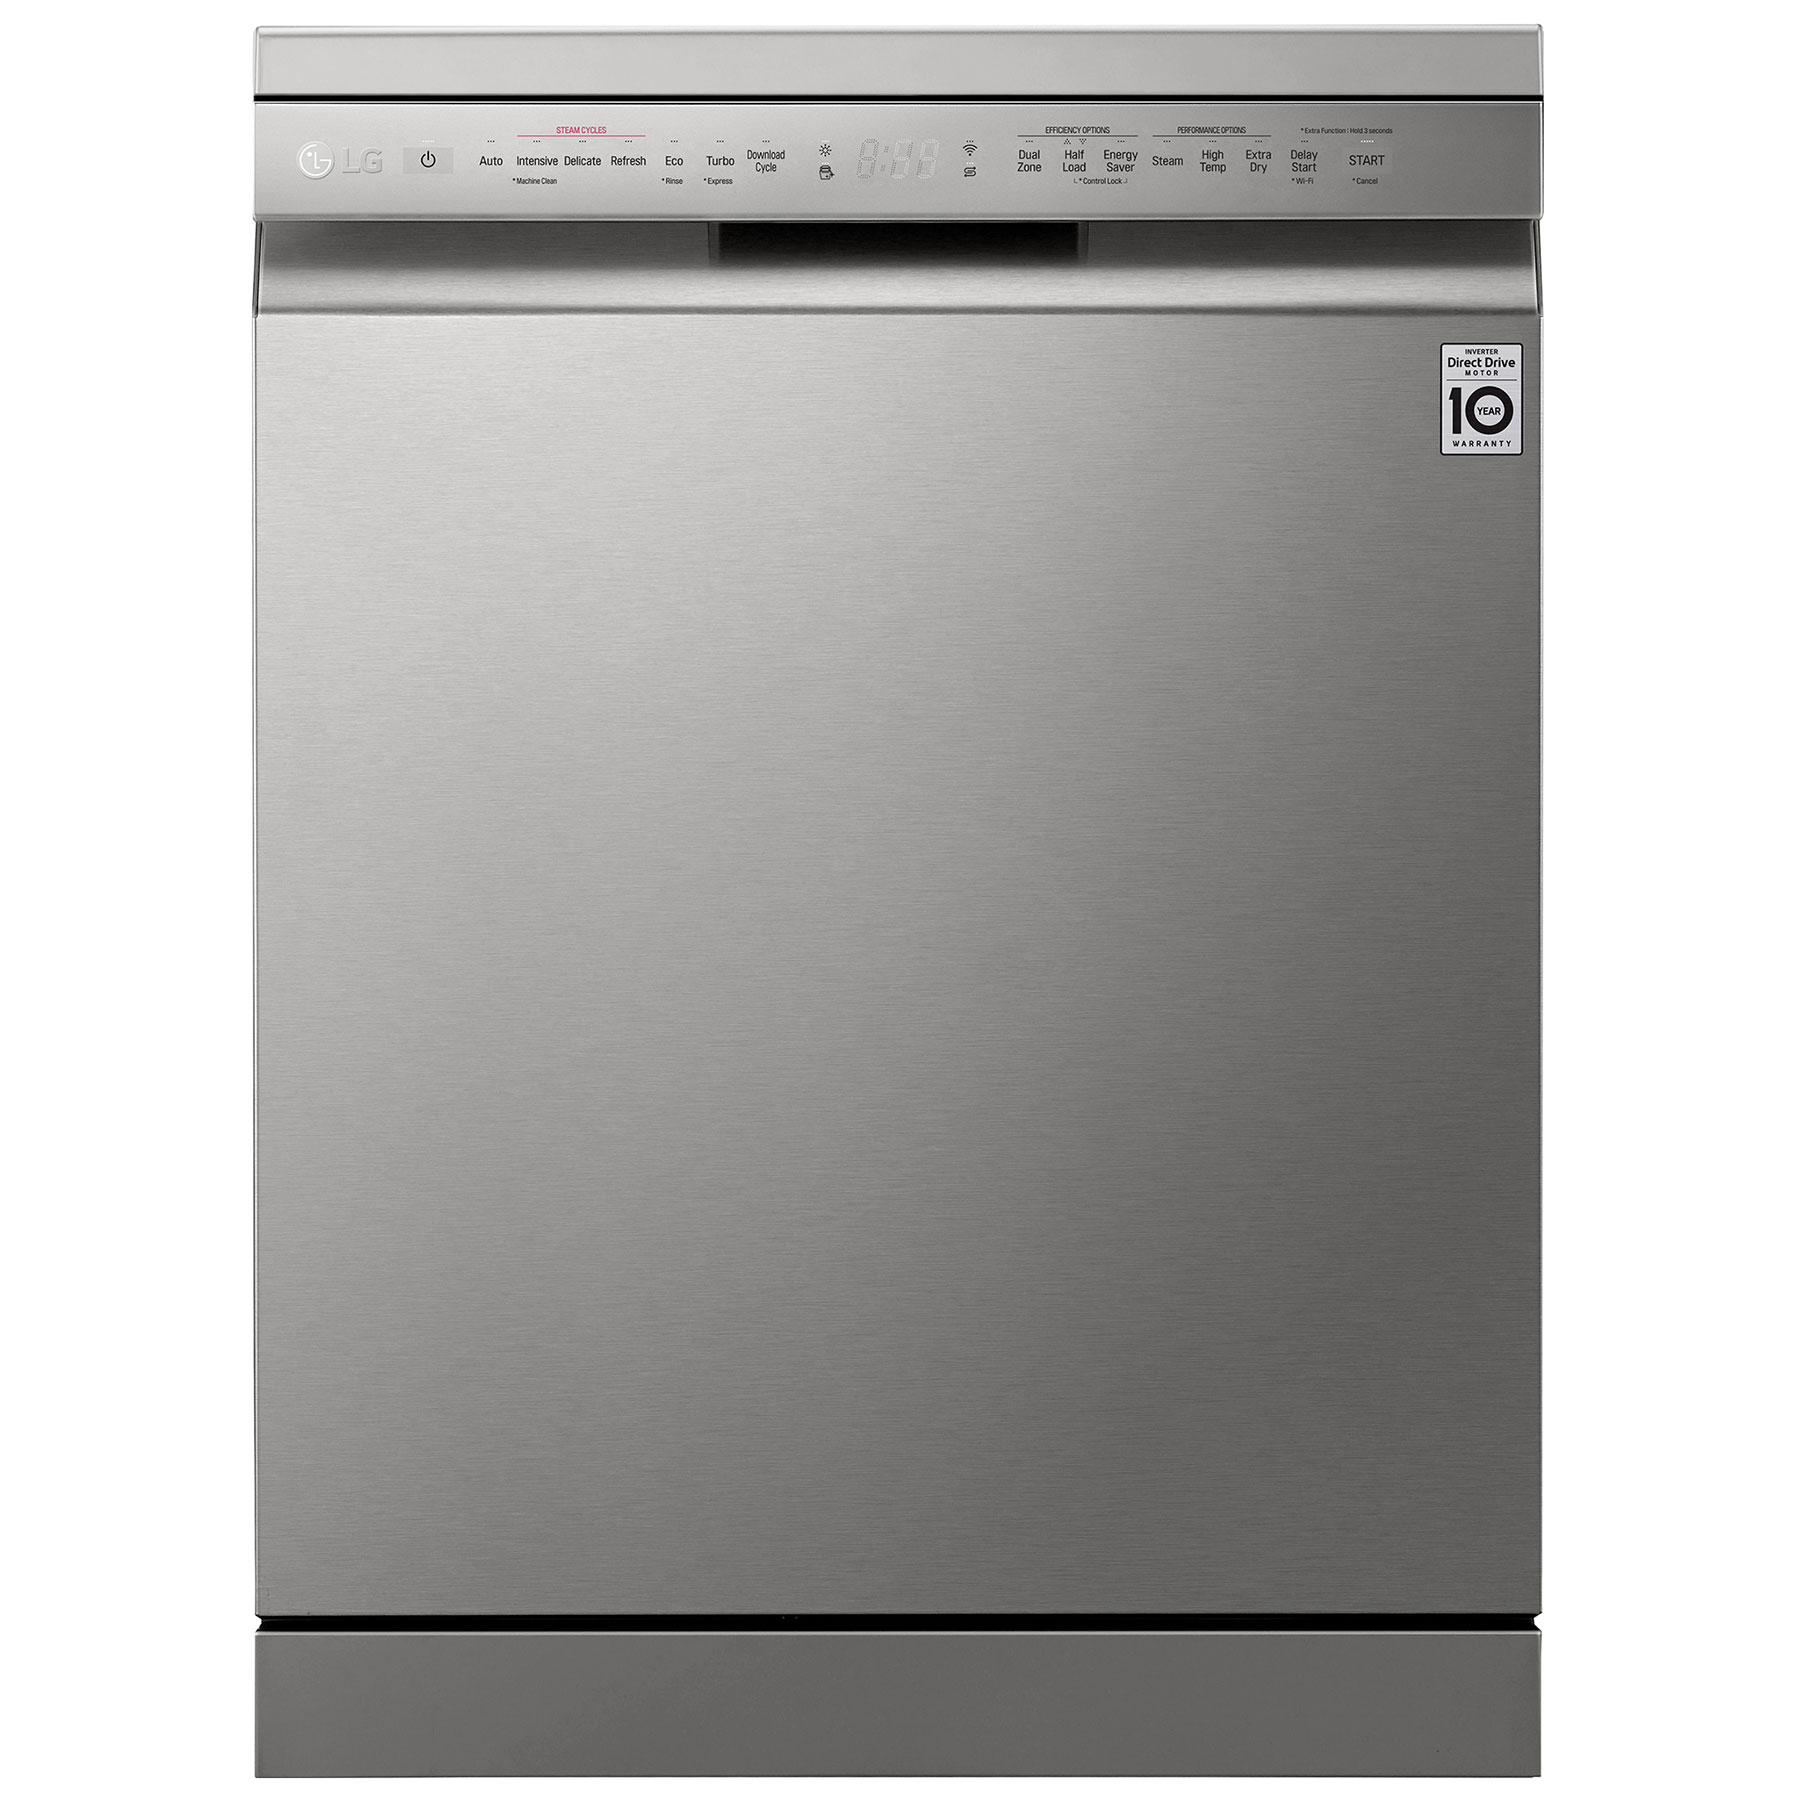 Image of LG DF325FPS 60cm Dishwasher St Steel 14 Place Setting E Rated Wi Fi